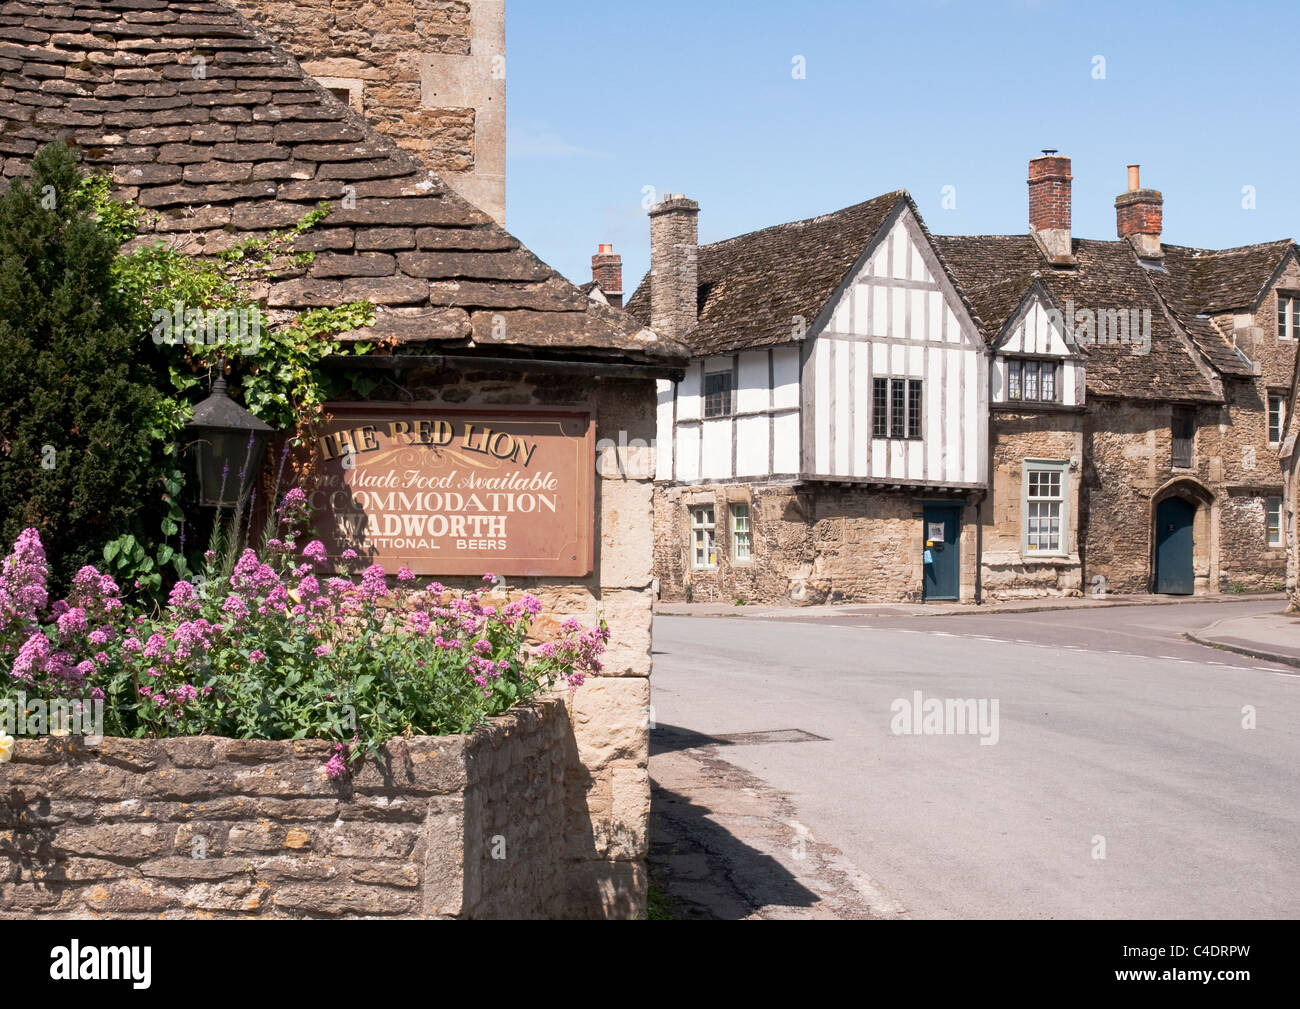 Lacock, Wiltshire England UK Banque D'Images